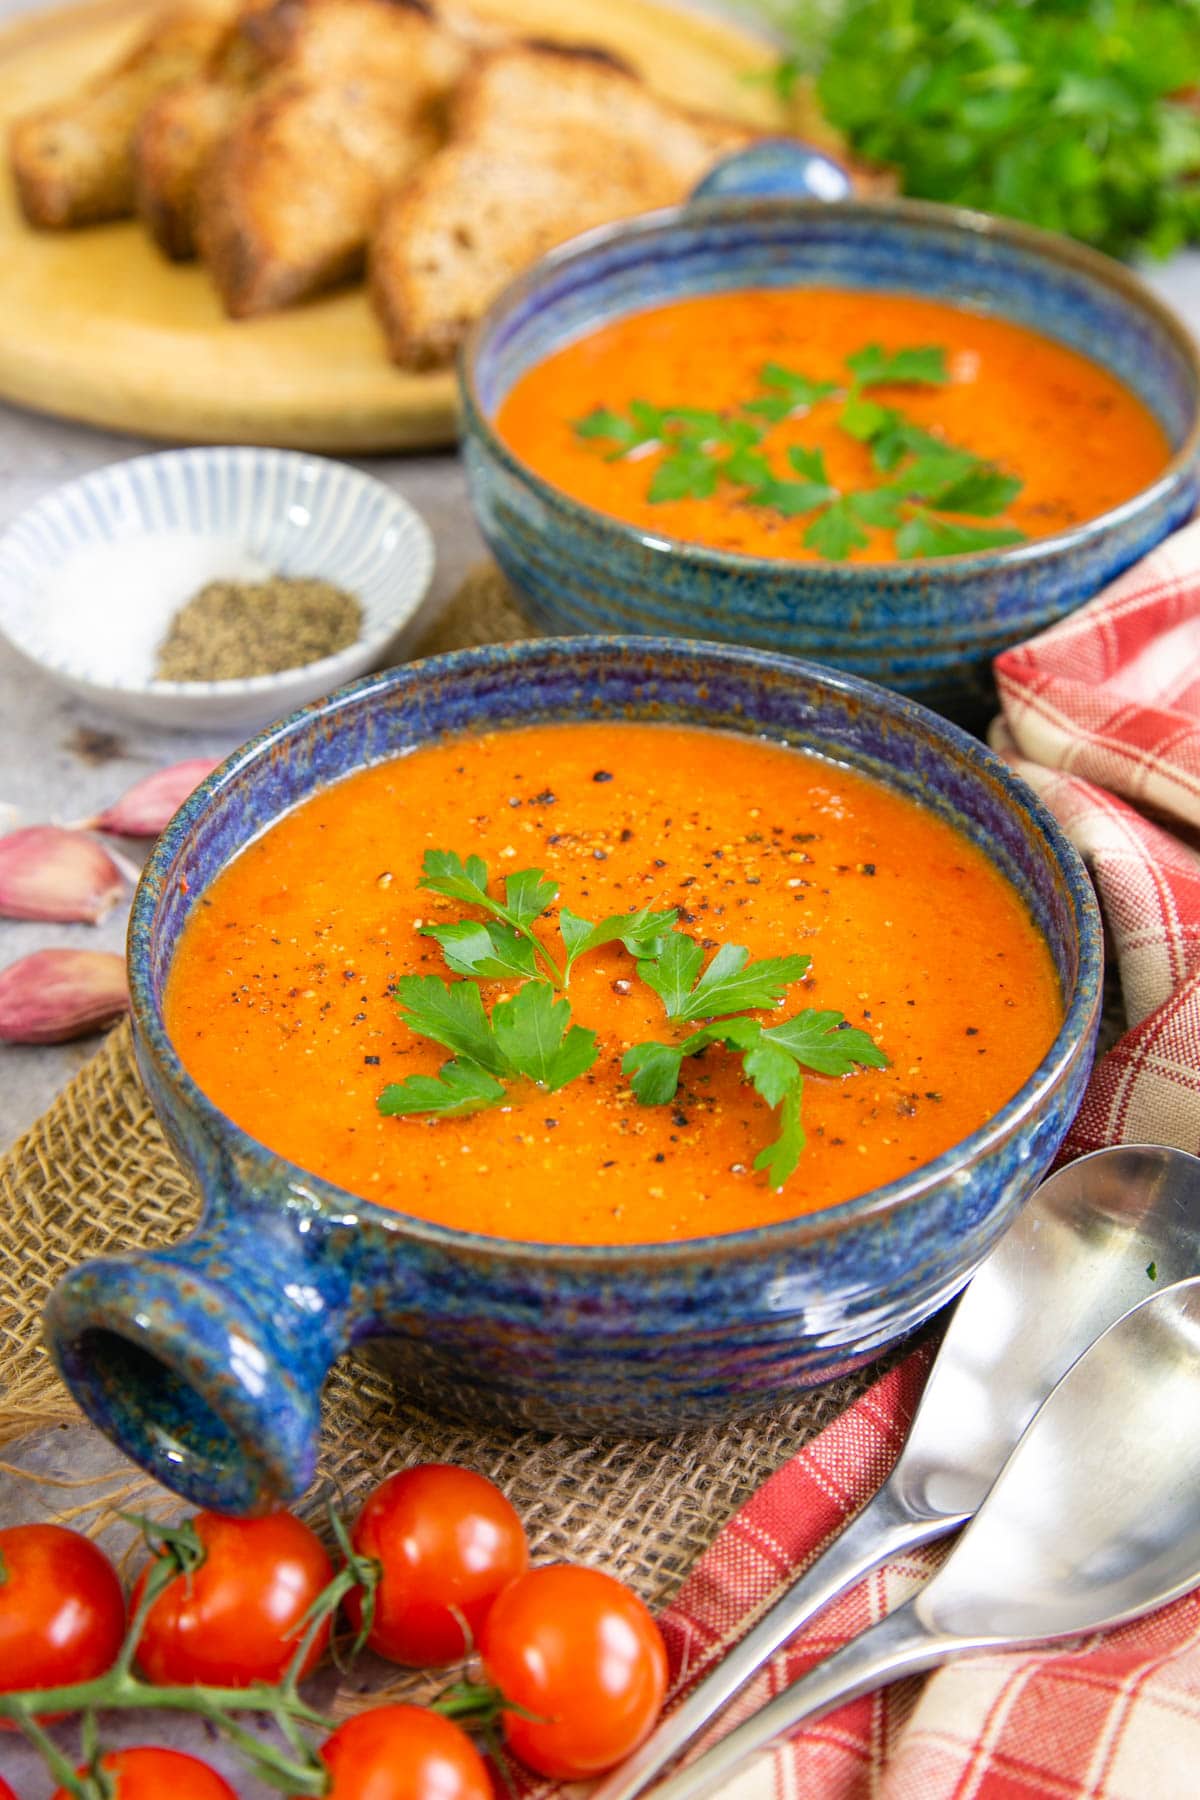 Rich, sweet, piquant tomato and red pepper soup exudes warmth with a rich orange red colour.